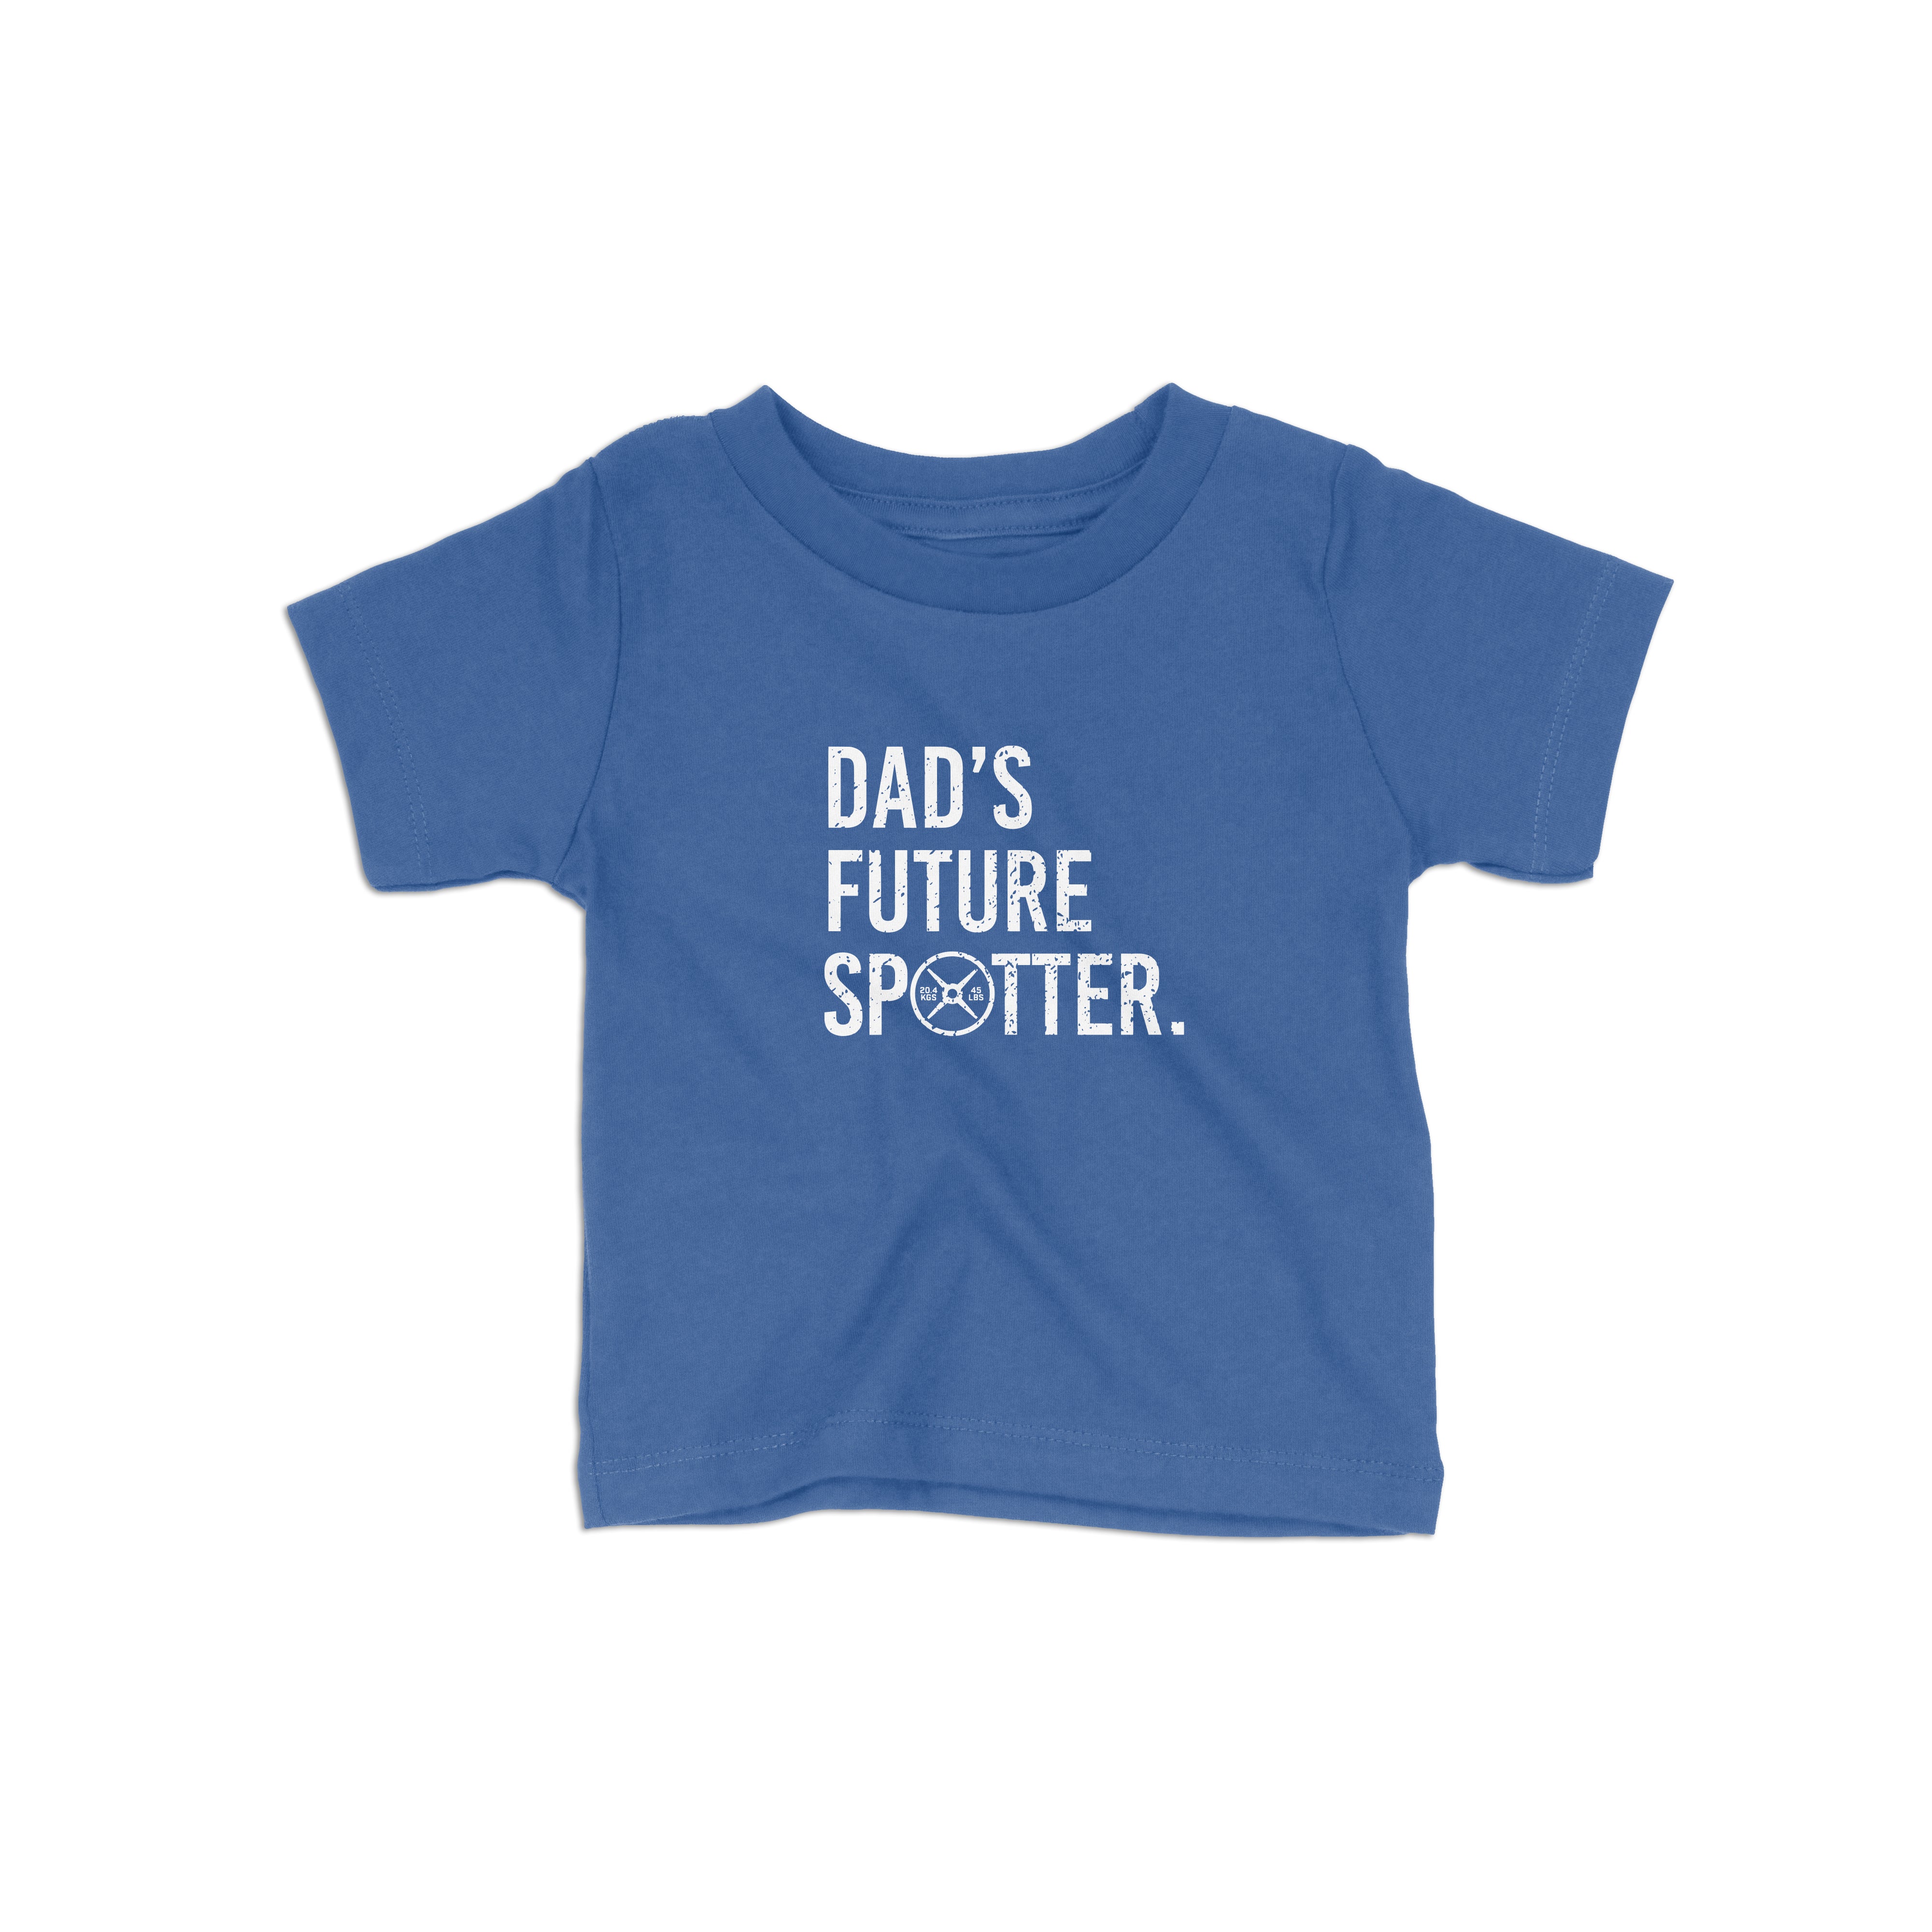 Dad's Future Spotter Toddler Tee